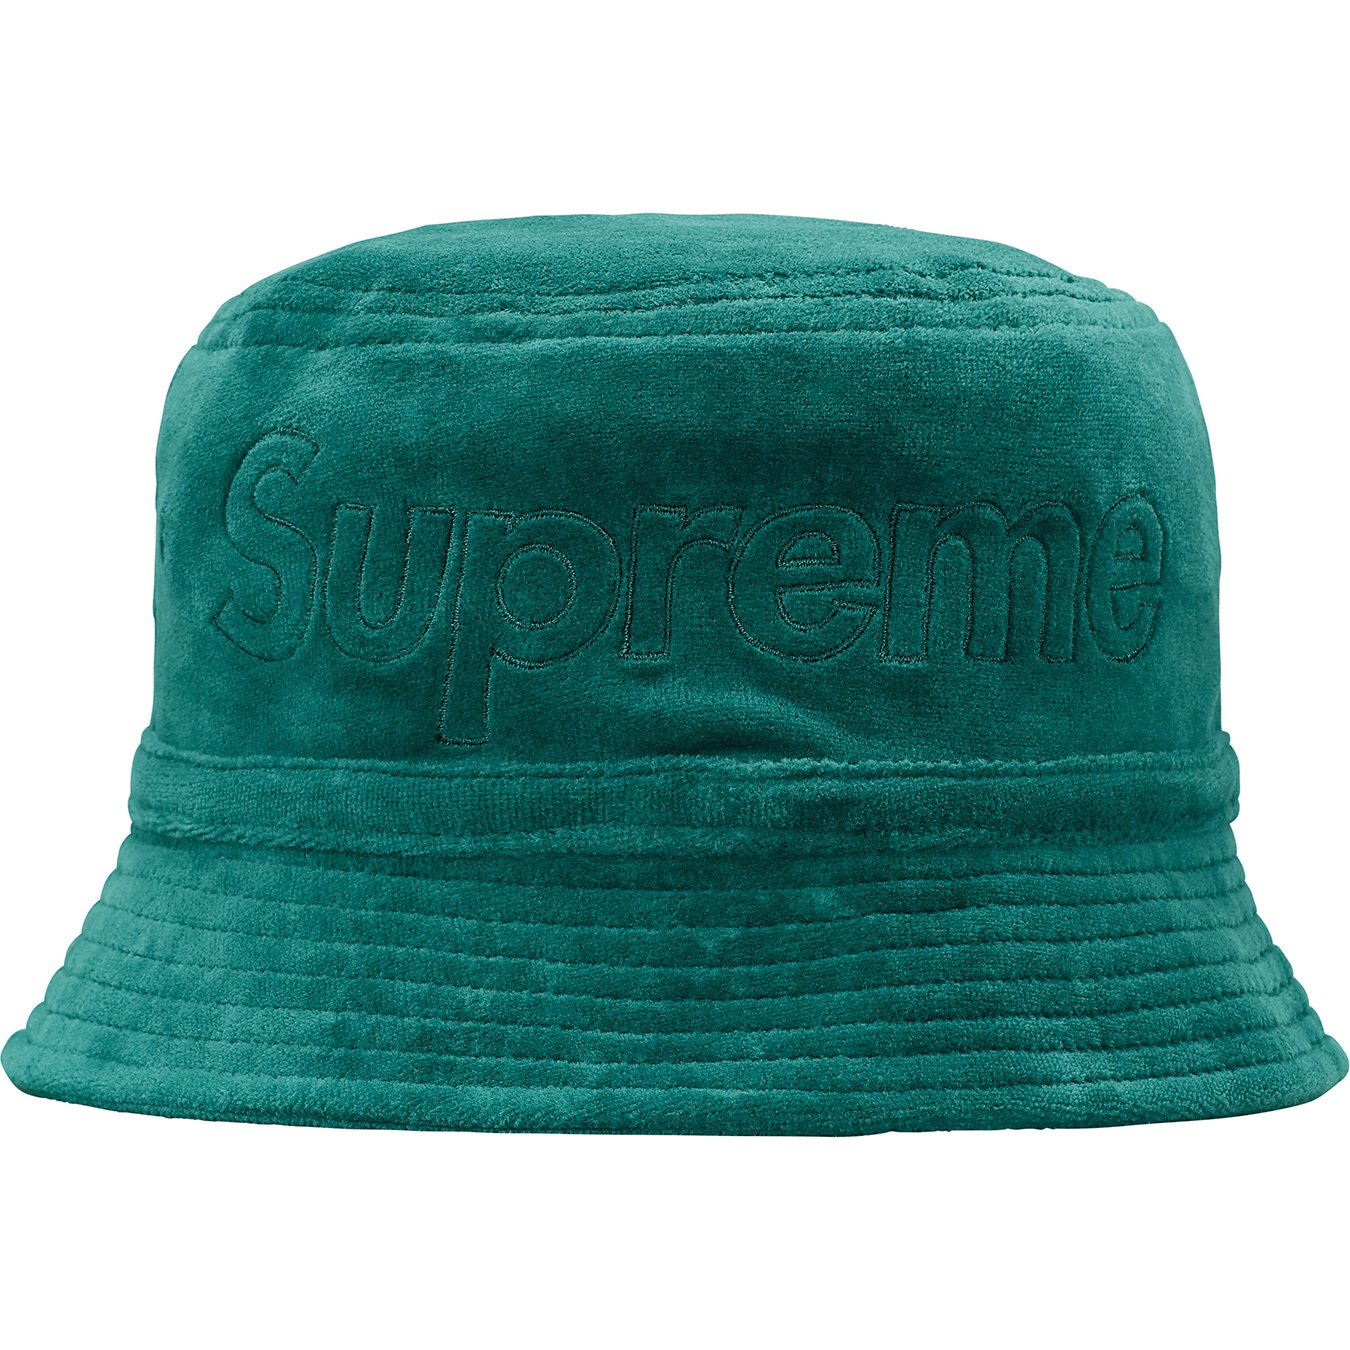 Supreme LACOSTE Velour Crusher Teal - SS18 - US